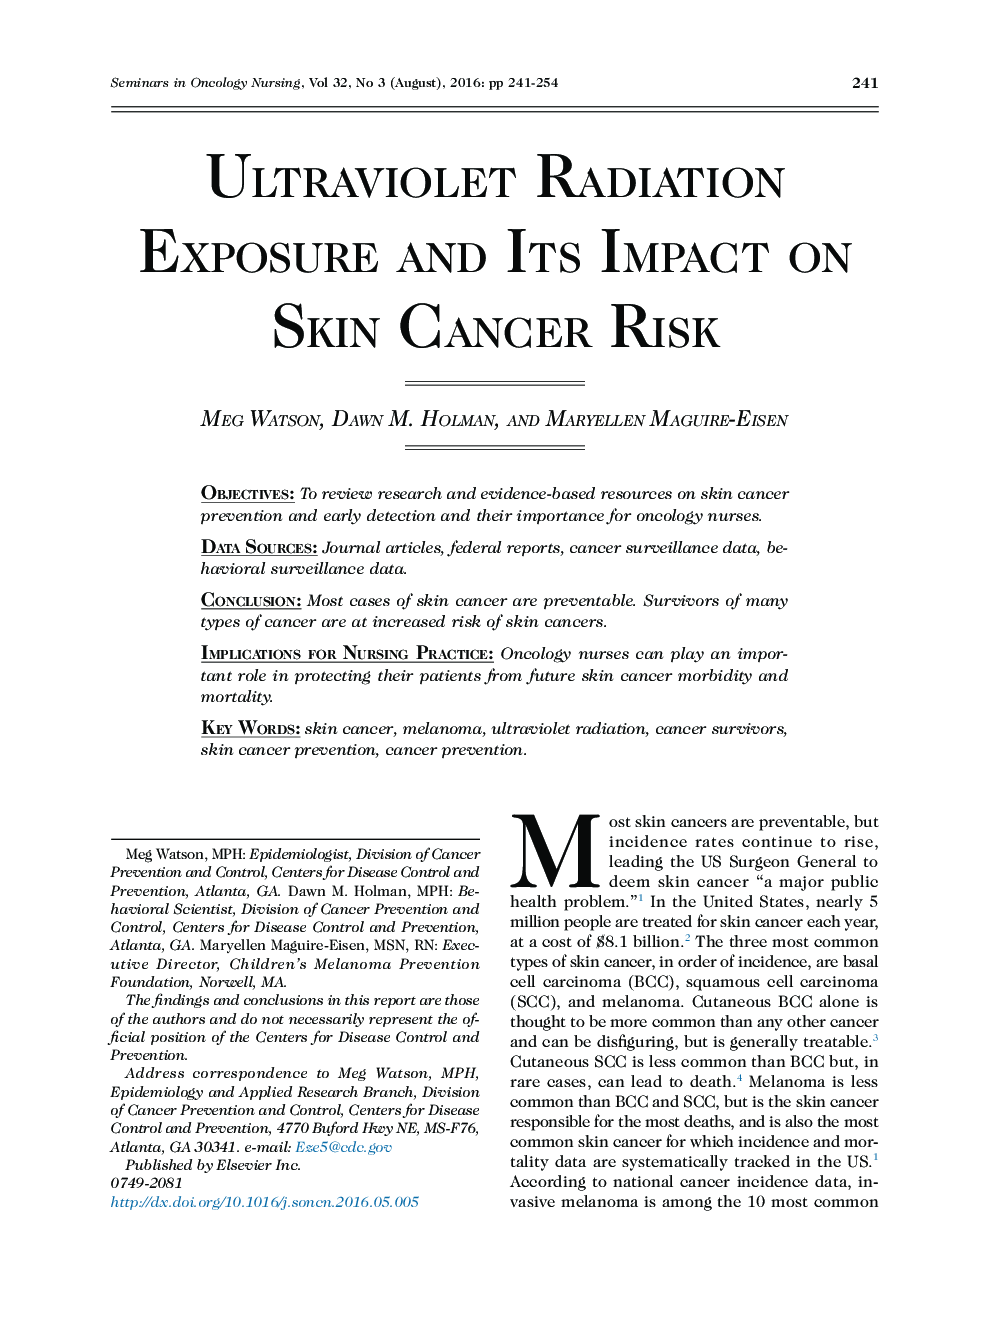 Ultraviolet Radiation Exposure and Its Impact on Skin Cancer Risk 